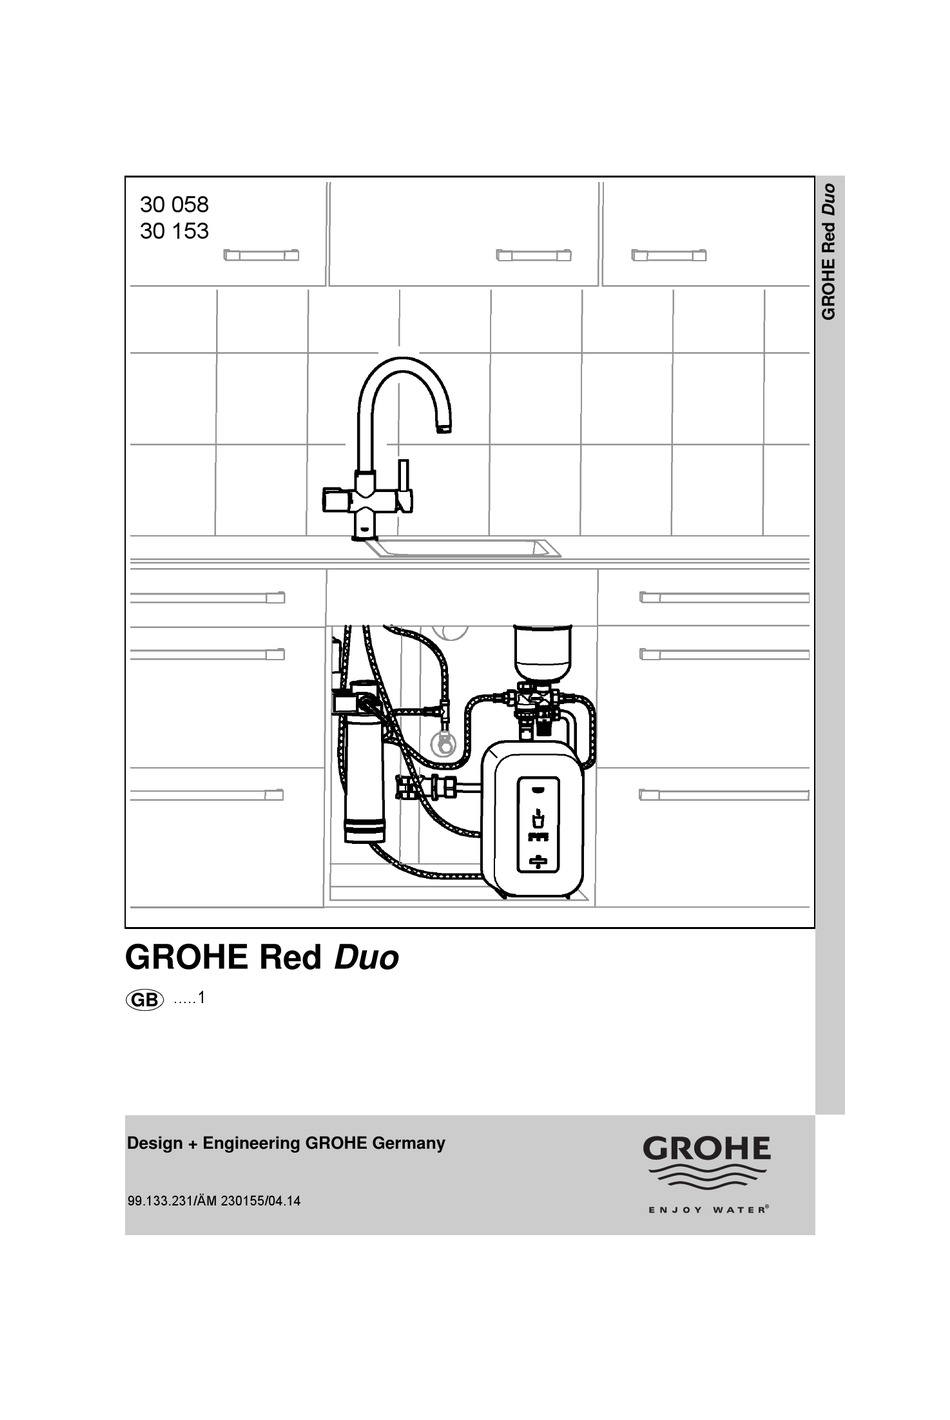 Hollow Styring Parcel GROHE RED DUO 30 058 TECHNICAL MANUAL Pdf Download | ManualsLib